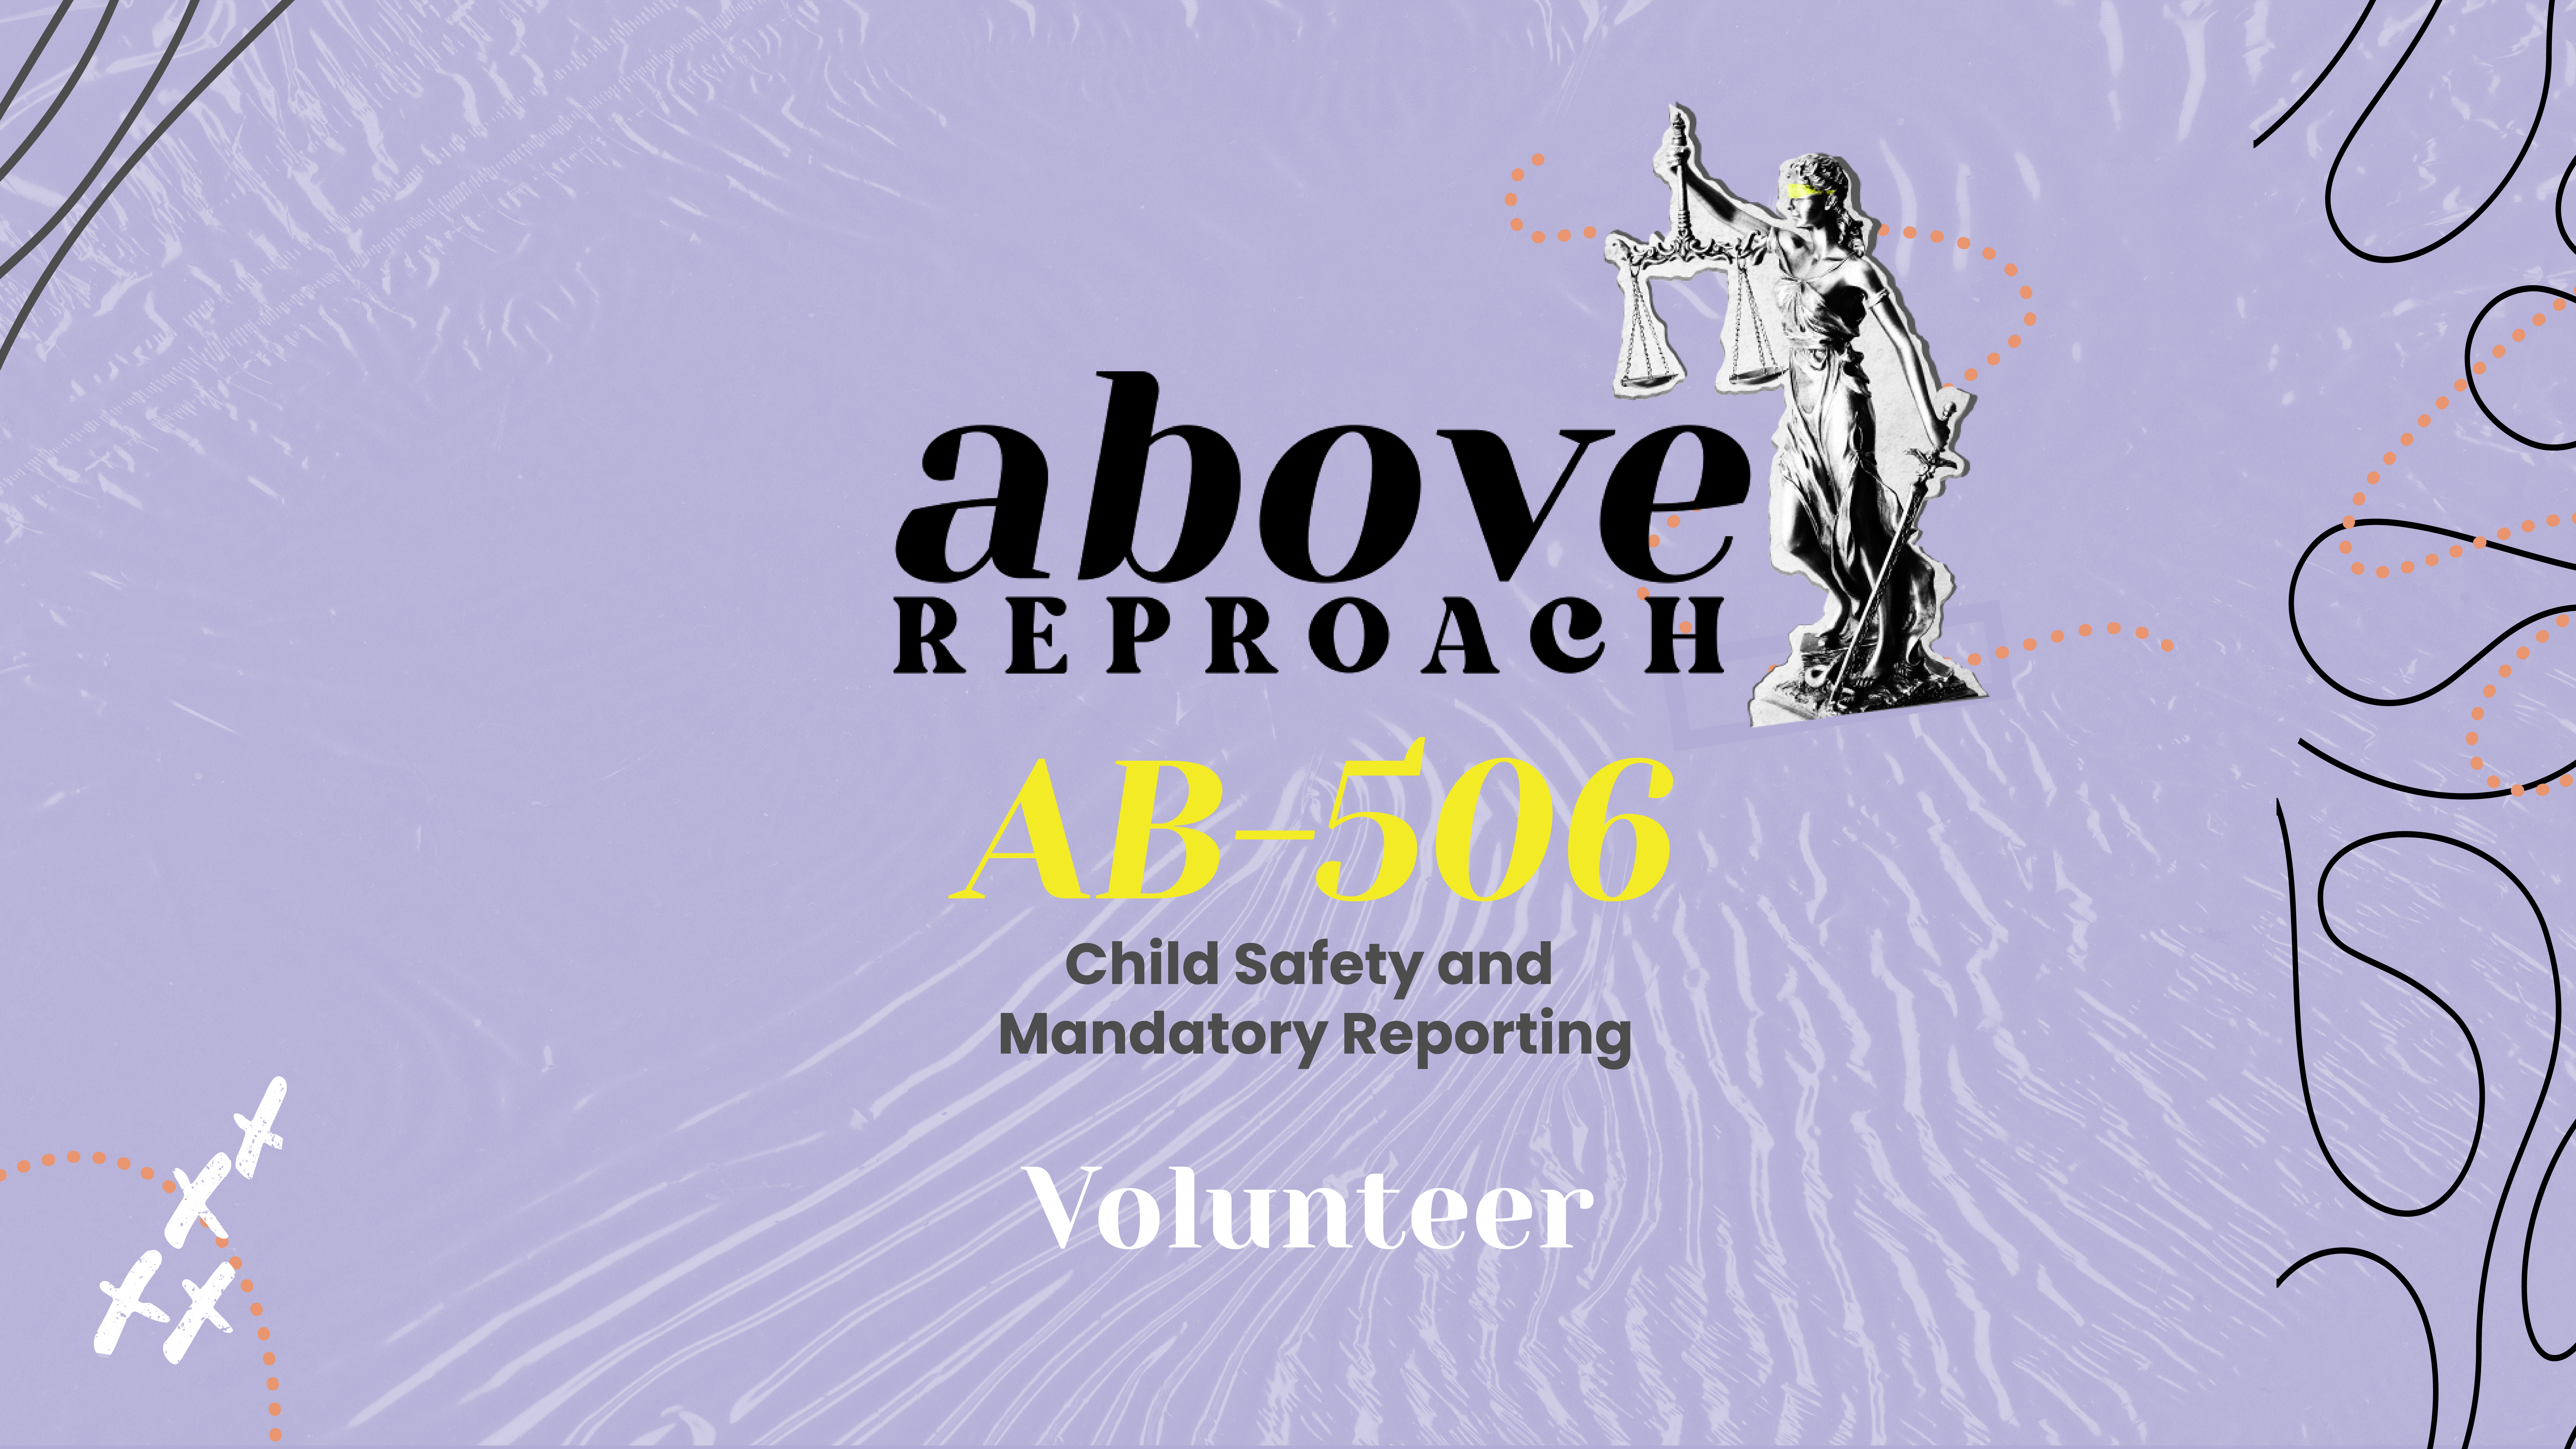 Featured image for “AB-506 Child Safety & Reporting Volunteer”